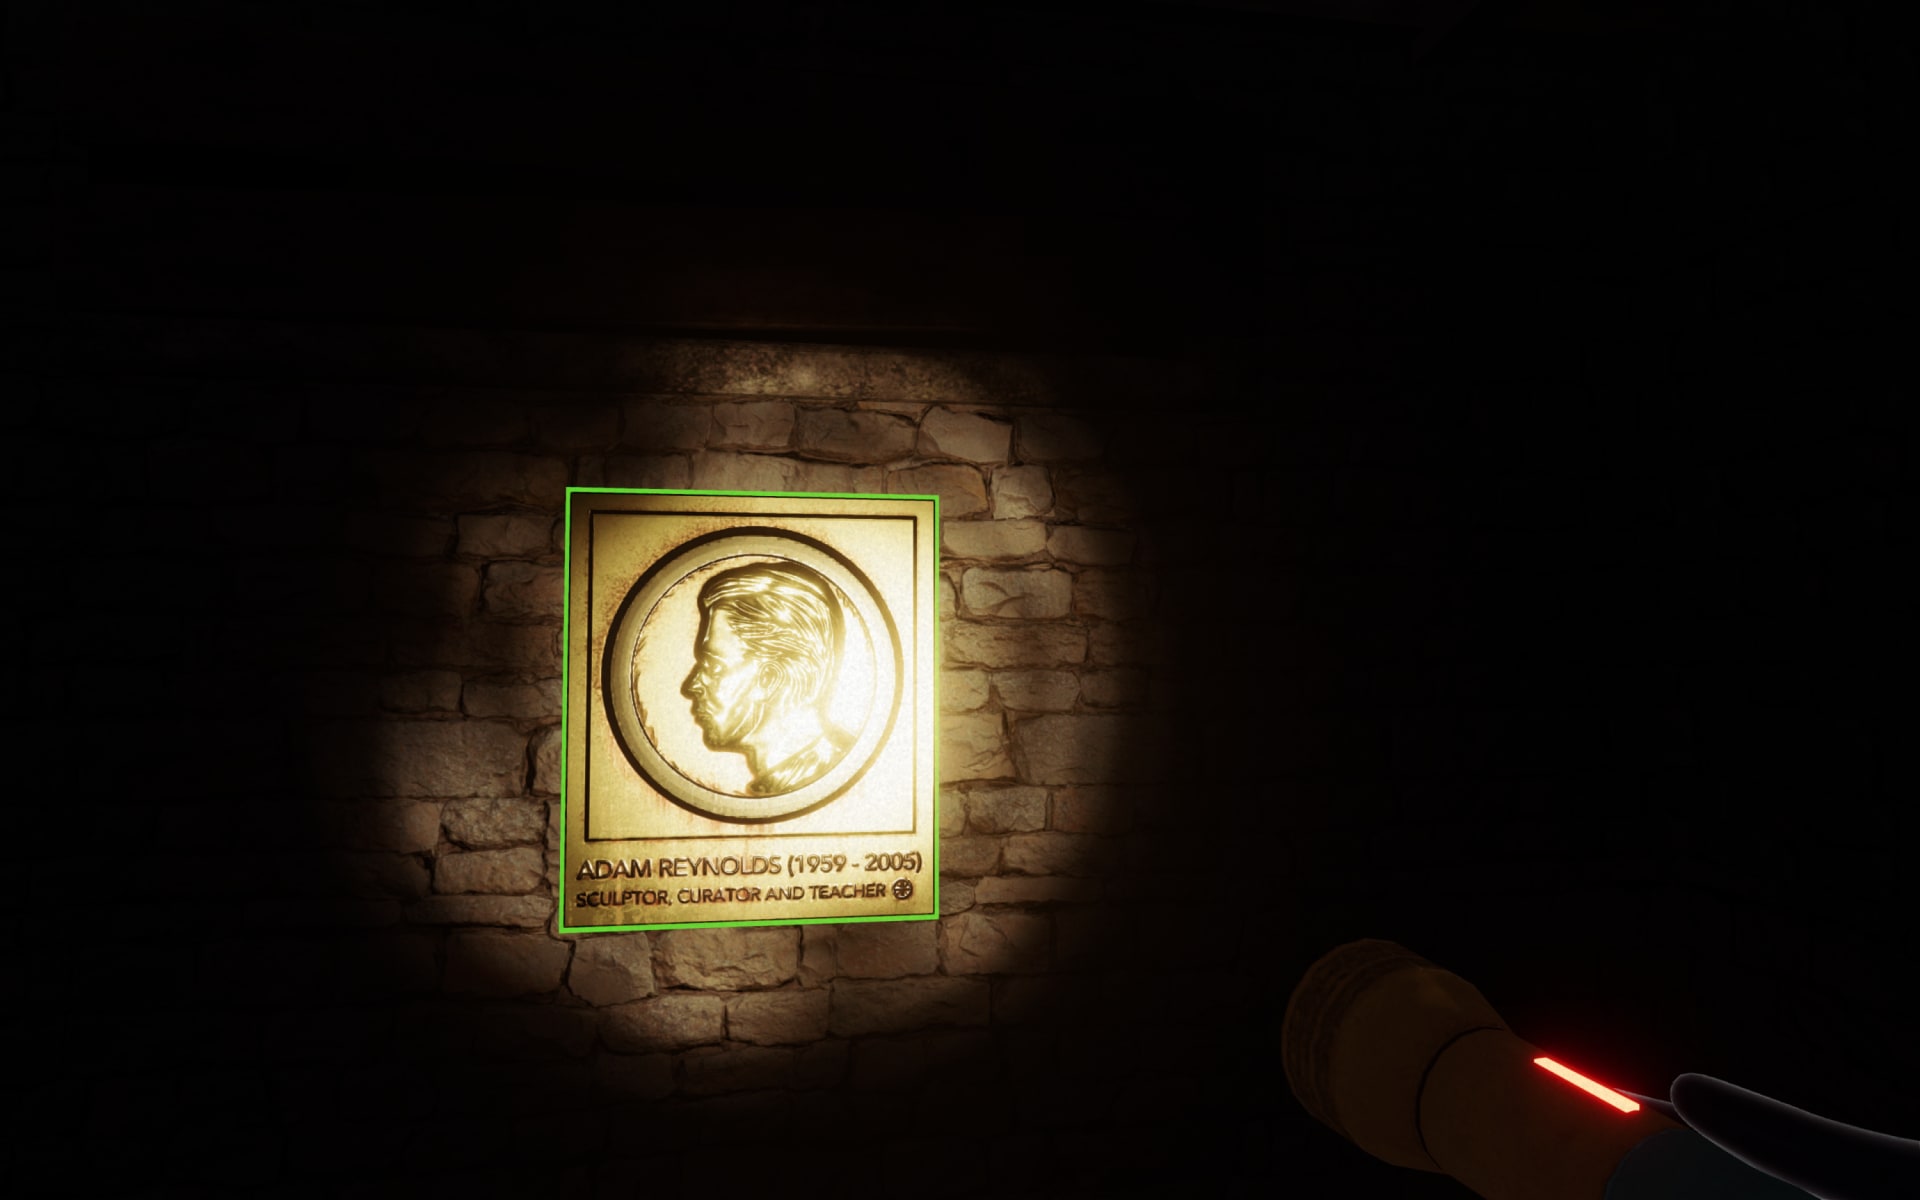 In-game screenshot depicting a plaque mounted on a dark brick wall. Perspective is limited by the reach of the torchlight. In front of the user, on the wall, a golden metal plaque is highlighted by both the torch and a thin neon green outline, indicating it is an interactive object. On the plaque, within a circle, is the side profile of a man. Beneath is text reading ‘Adam Reynolds. Sculptor, Creator, and Teacher.’